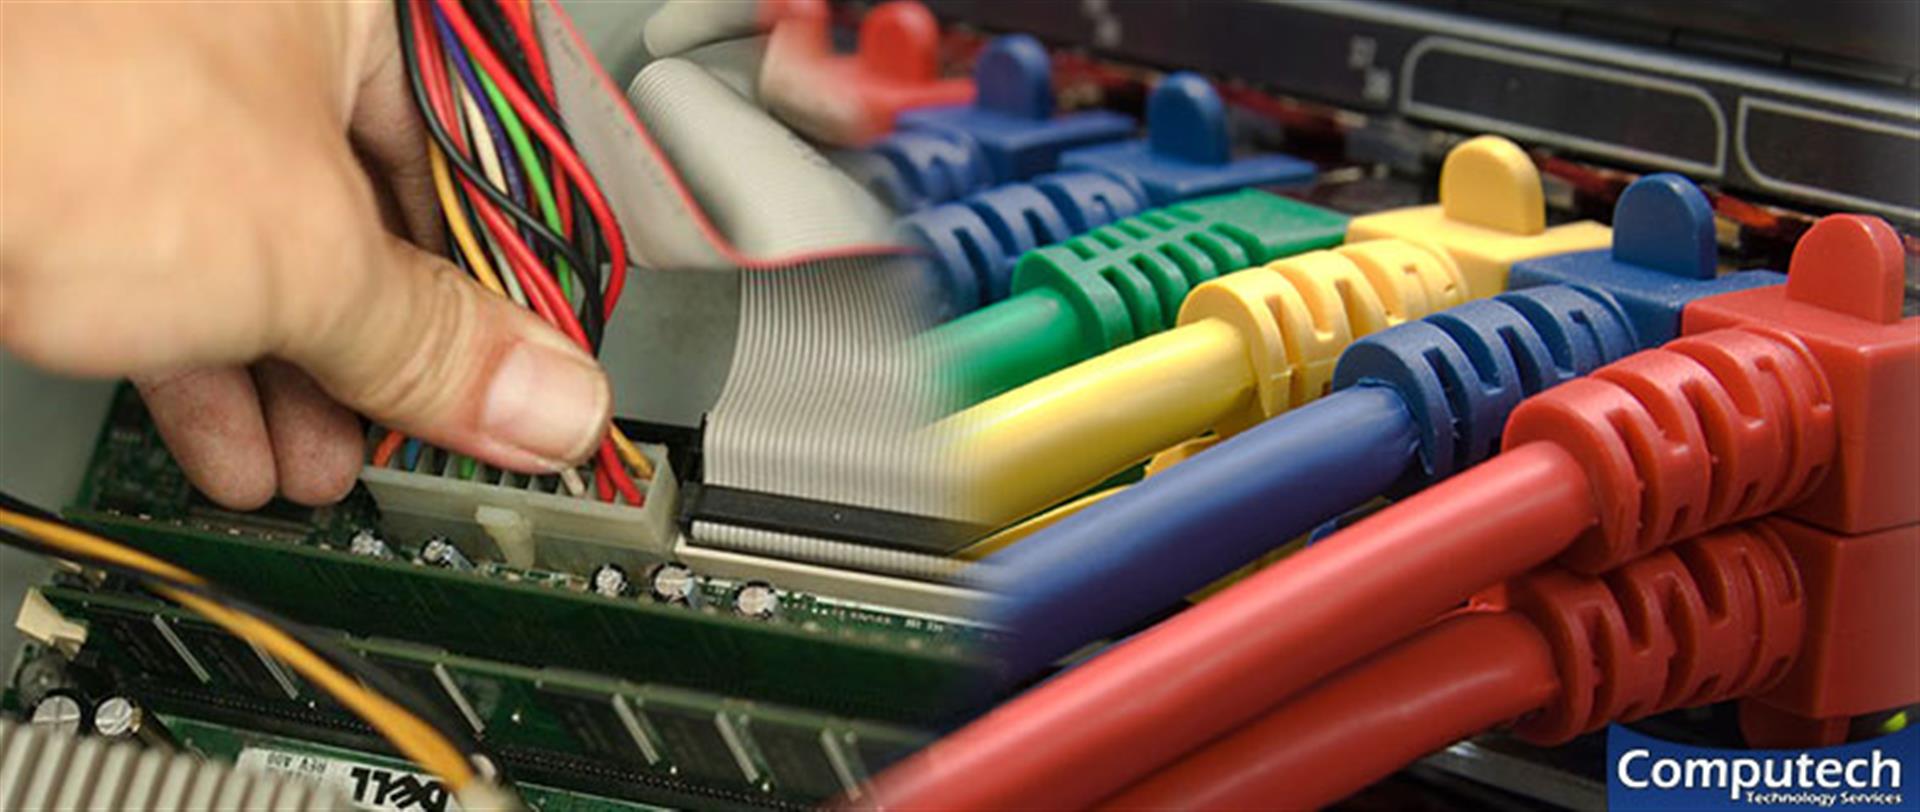 Fairfax Virginia On-Site Computer & Printer Repairs, Network, Voice & Data Cabling Solutions